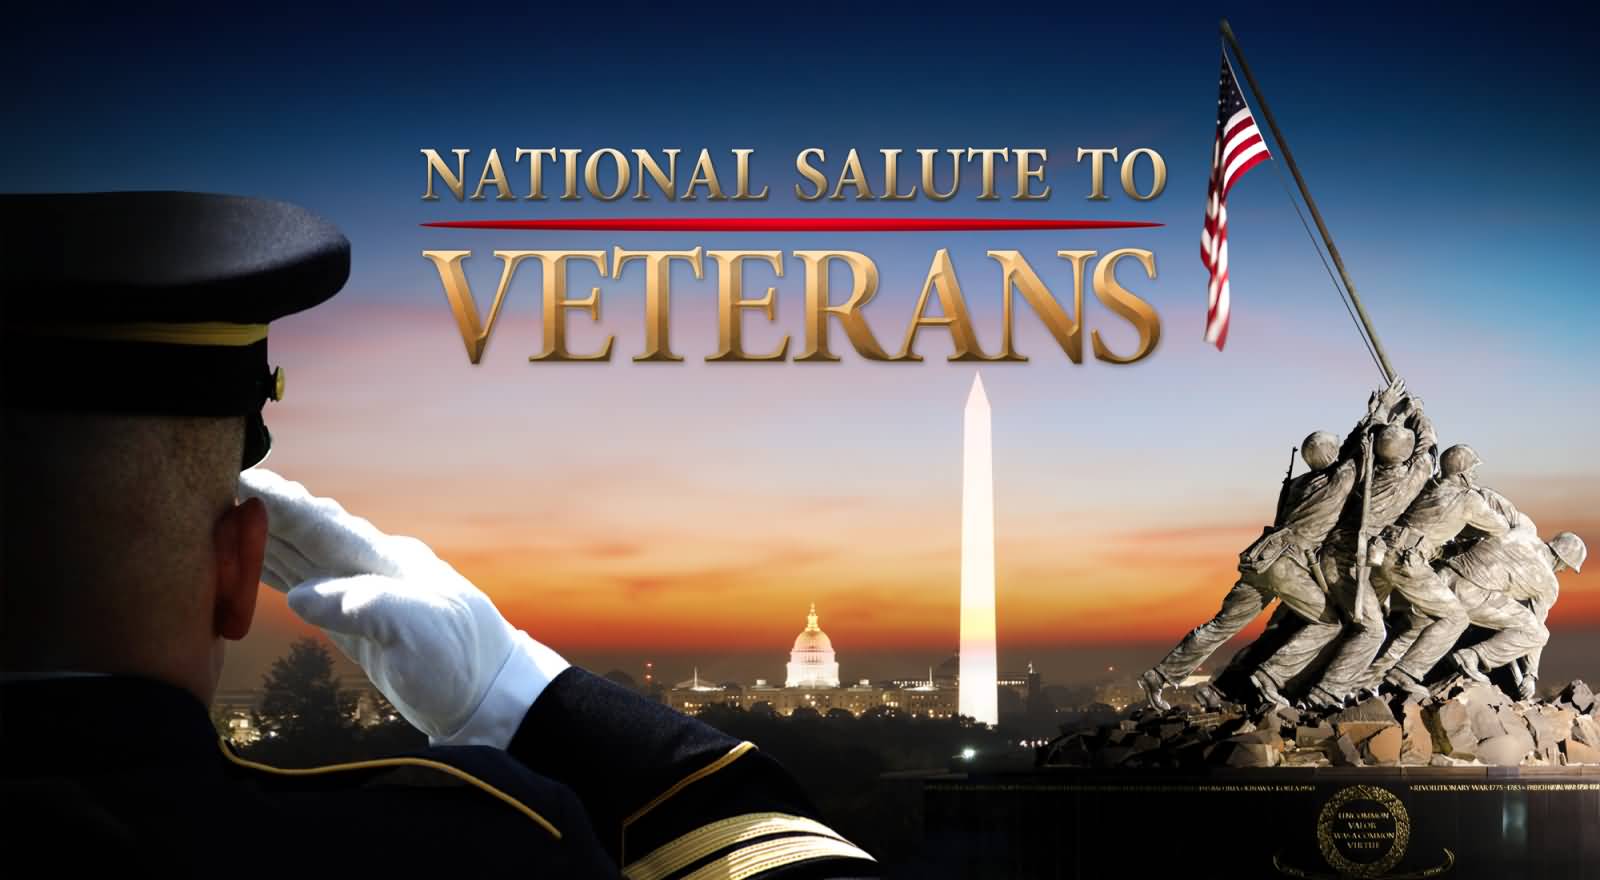 National Salute To Veterans